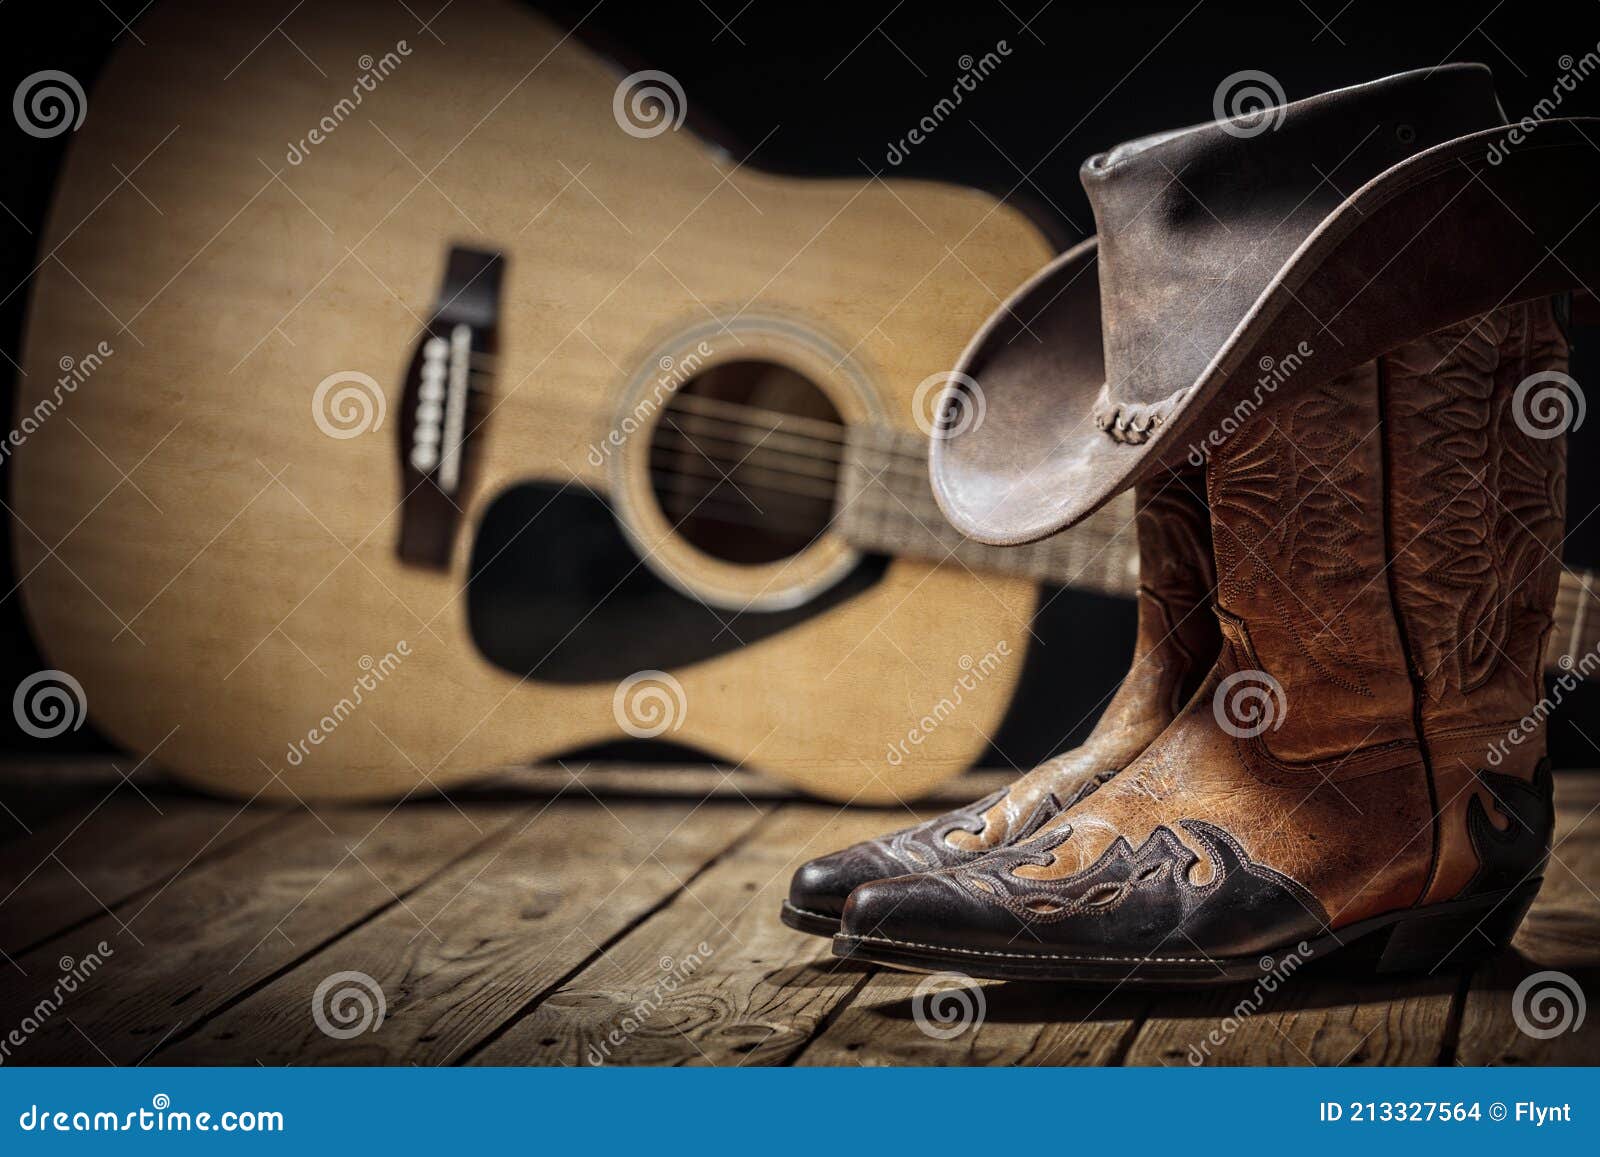 country music festival live concert with acoustic guitar, cowboy hat and boots